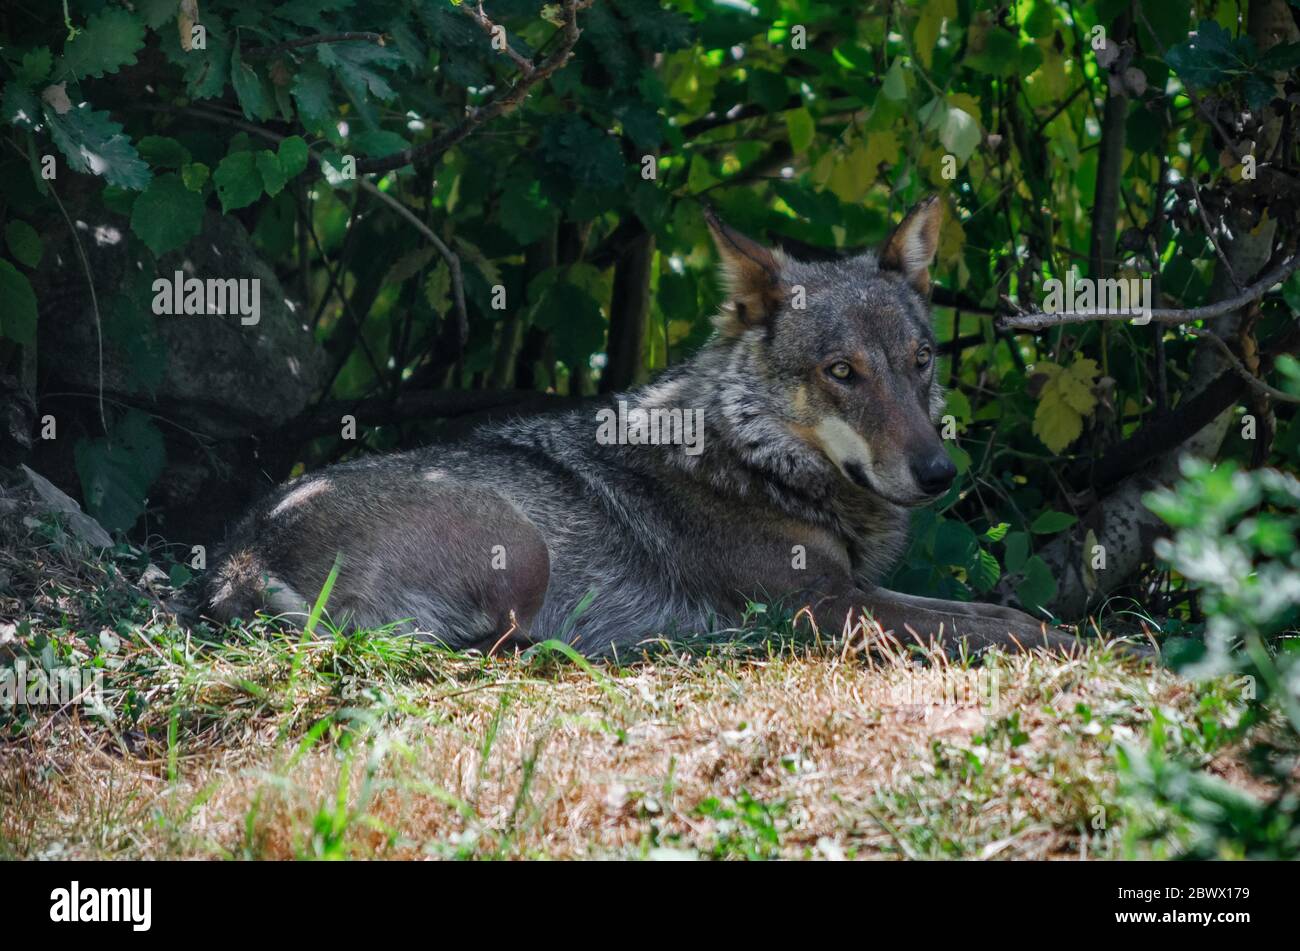 ENTRACQUE, ITALY - AUGUST 13, 2016 - Italian wolf (canis lupus italicus) in wildlife centre 'Uomini e lupi' of Entracque, Italy, on august 13, 2016. Stock Photo